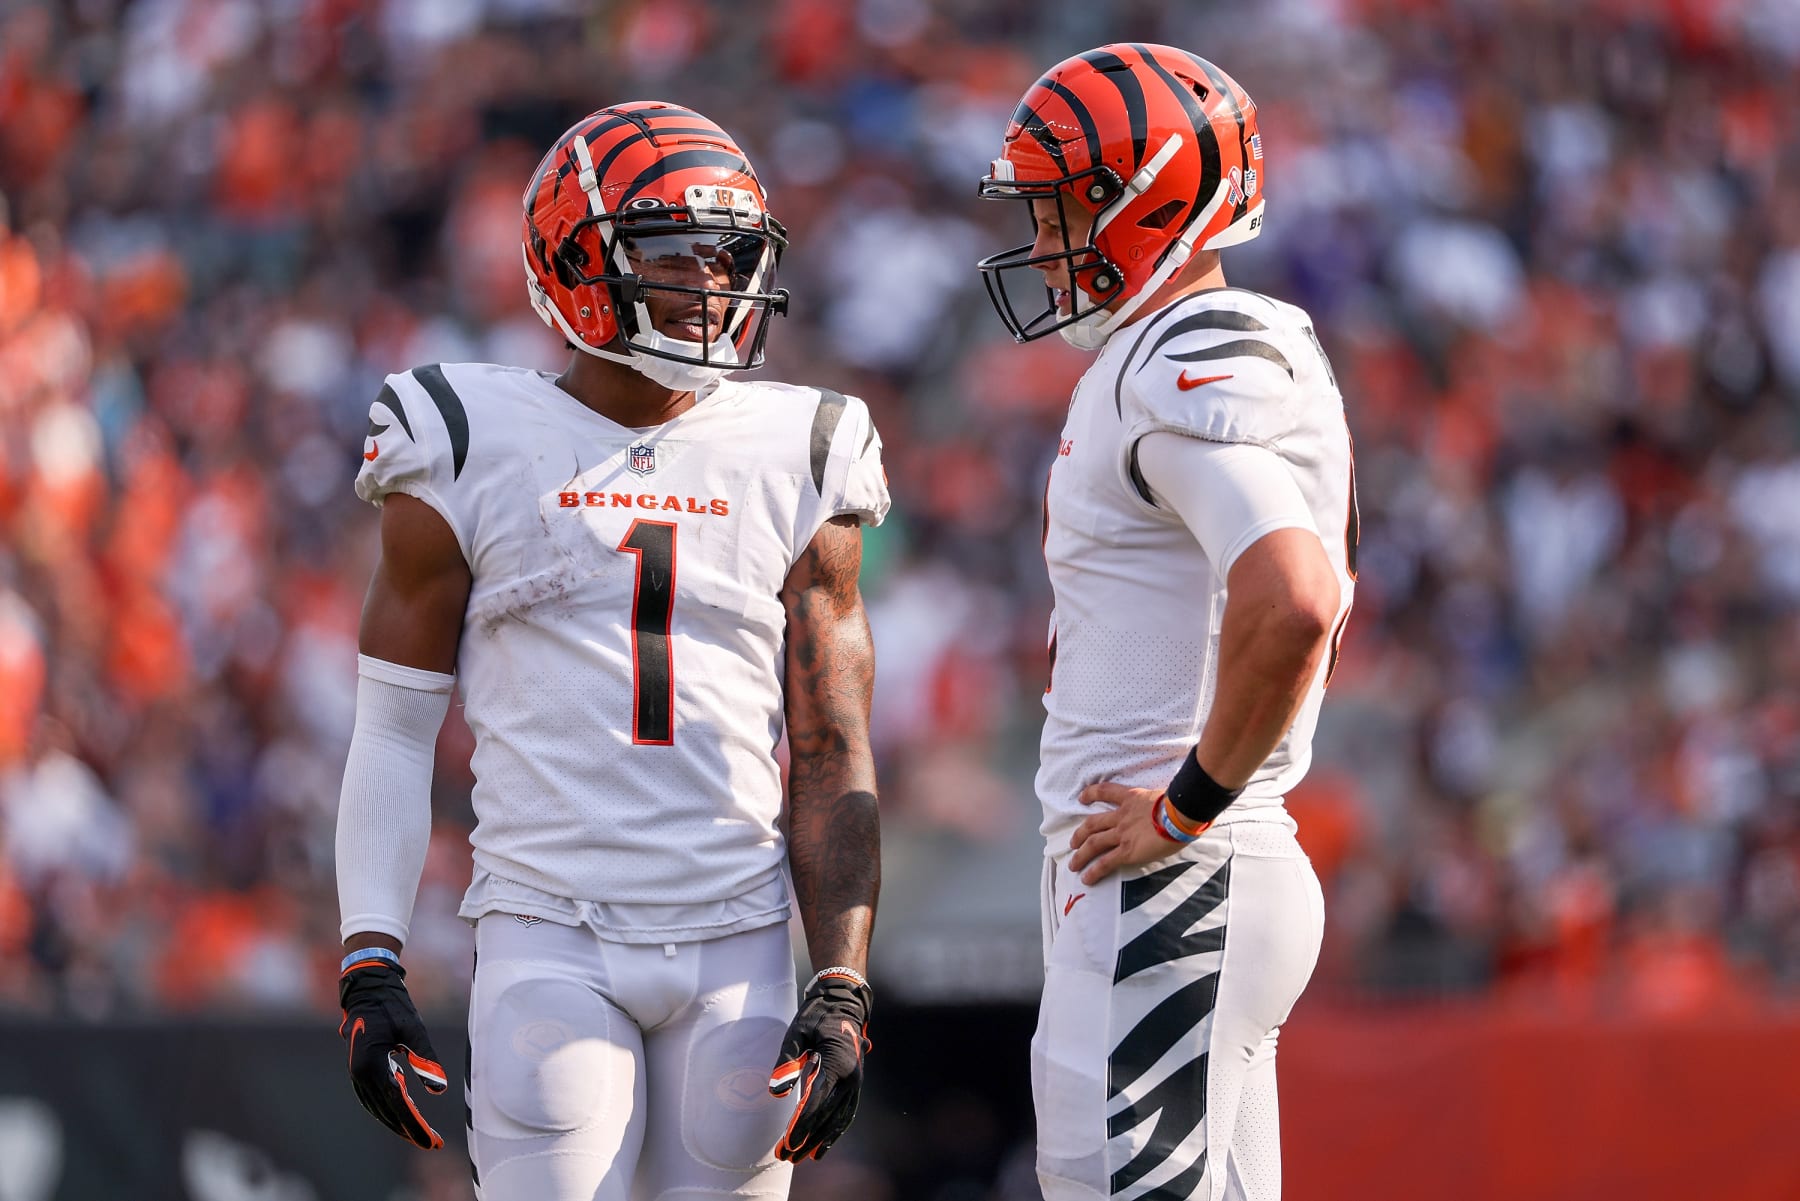 Browns schedule: Joe Burrow, Russell Wilson among QBs facing Cleveland -  Dawgs By Nature